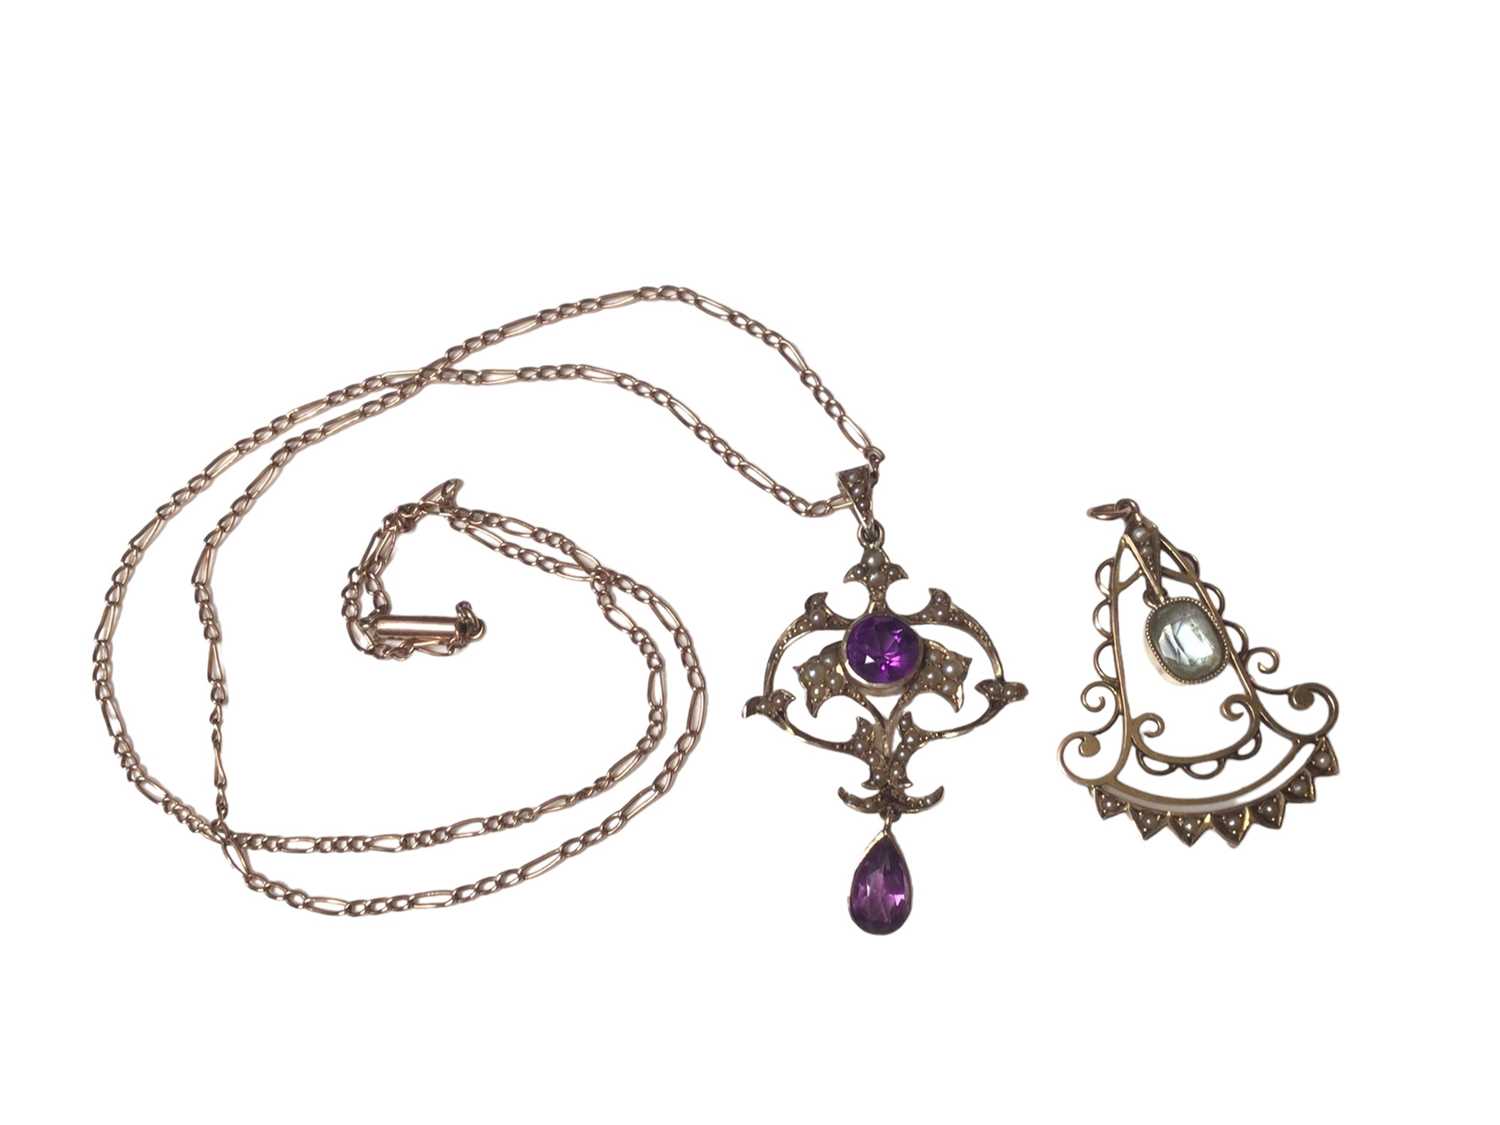 Edwardian gold amethyst and seed pearl pendant necklace on chain together with an Edwardian gold and - Image 3 of 3